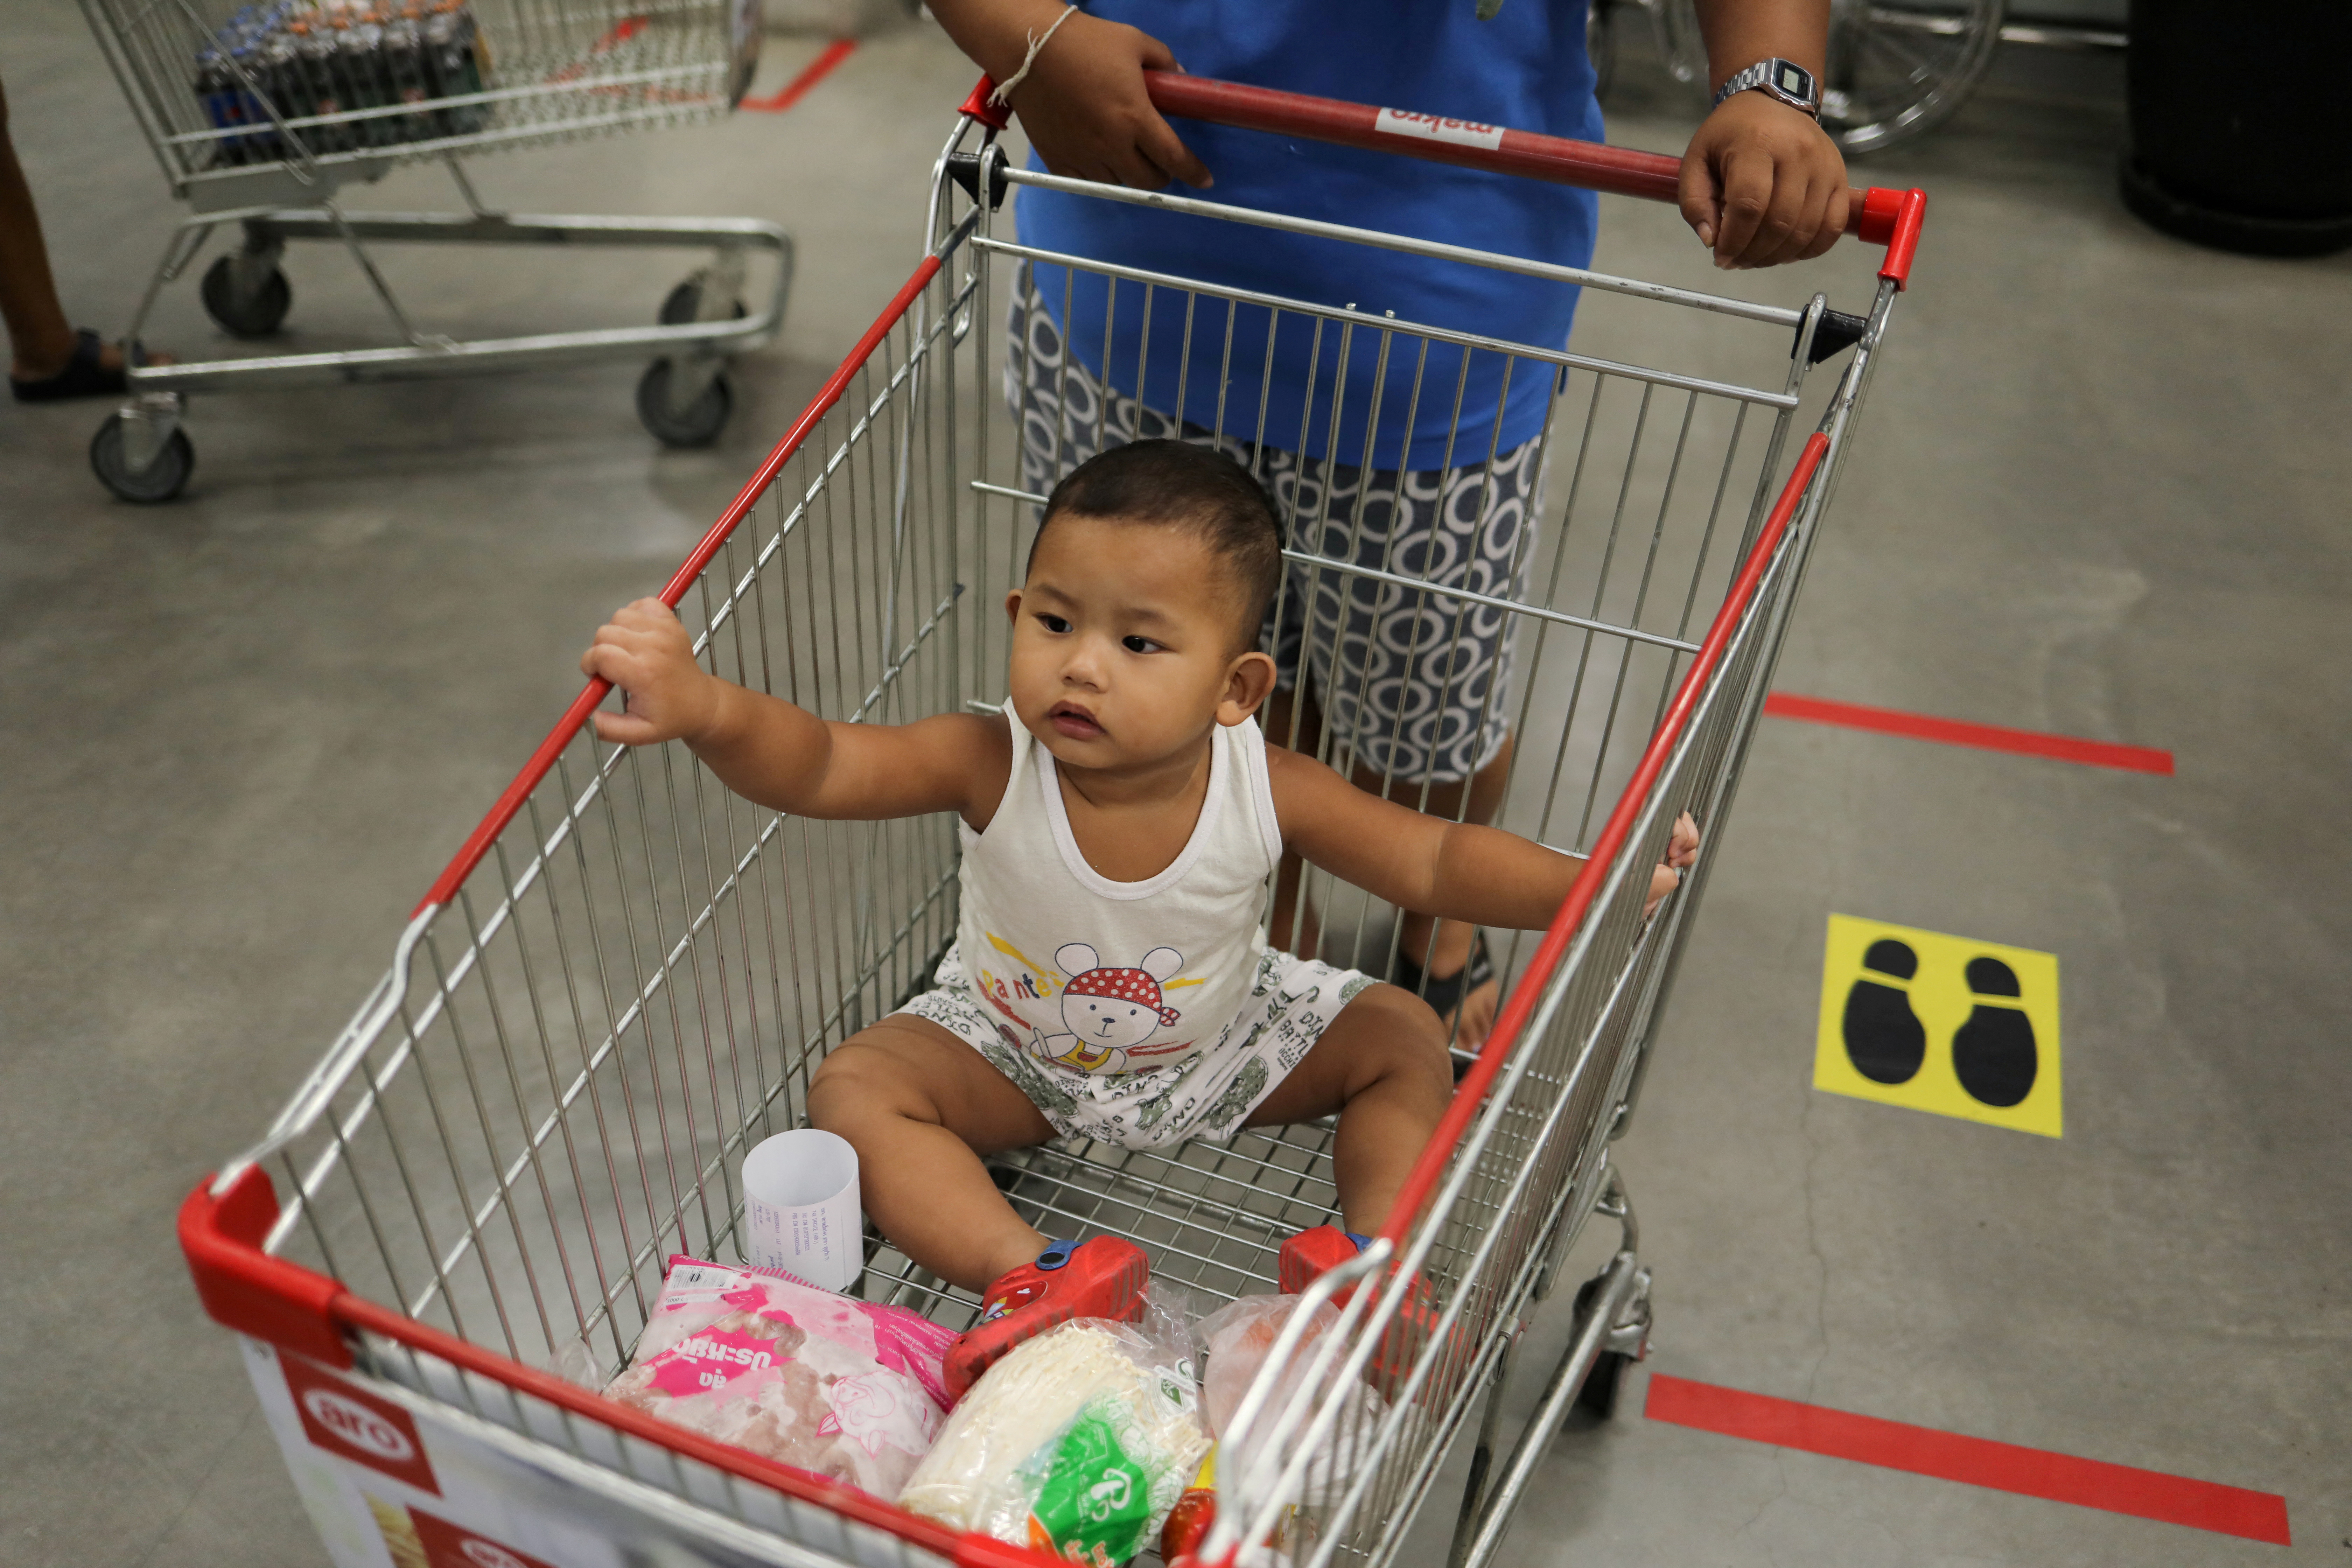 A baby is seen in a shopping cart after the government eased some protective measures following the coronavirus disease (COVID-19) outbreak, in Bangkok